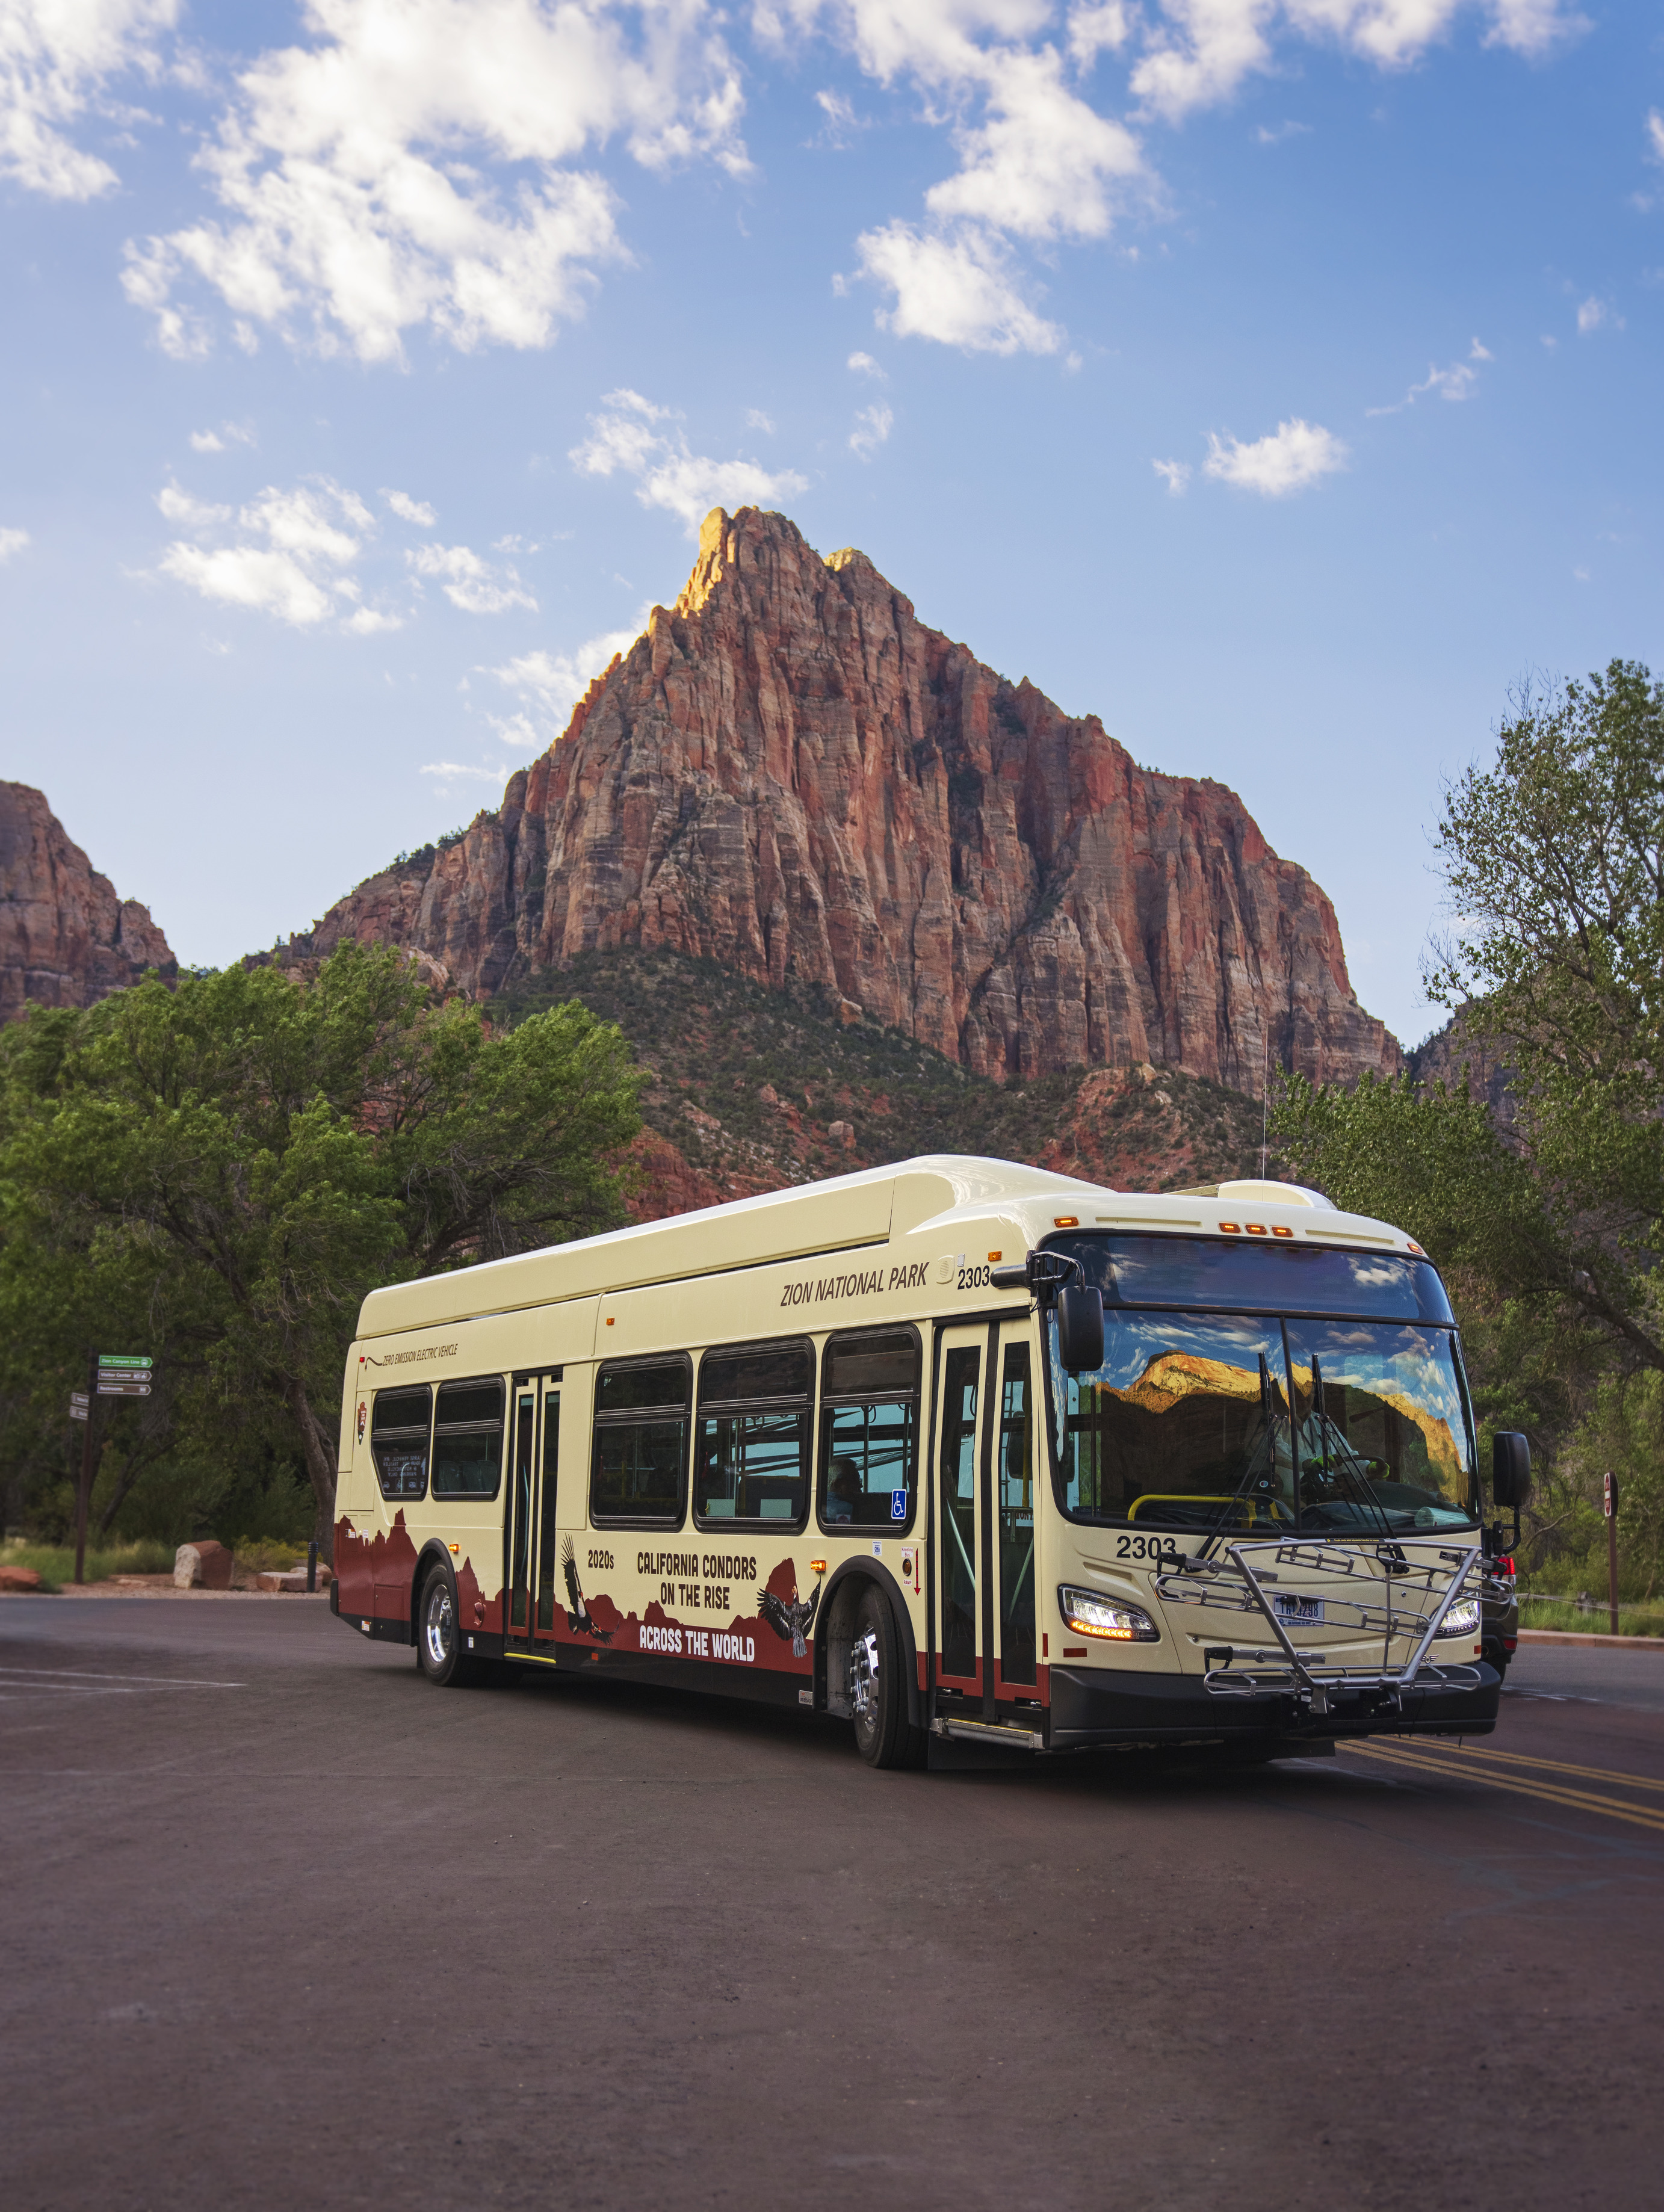 Electric bus at Zion National Park